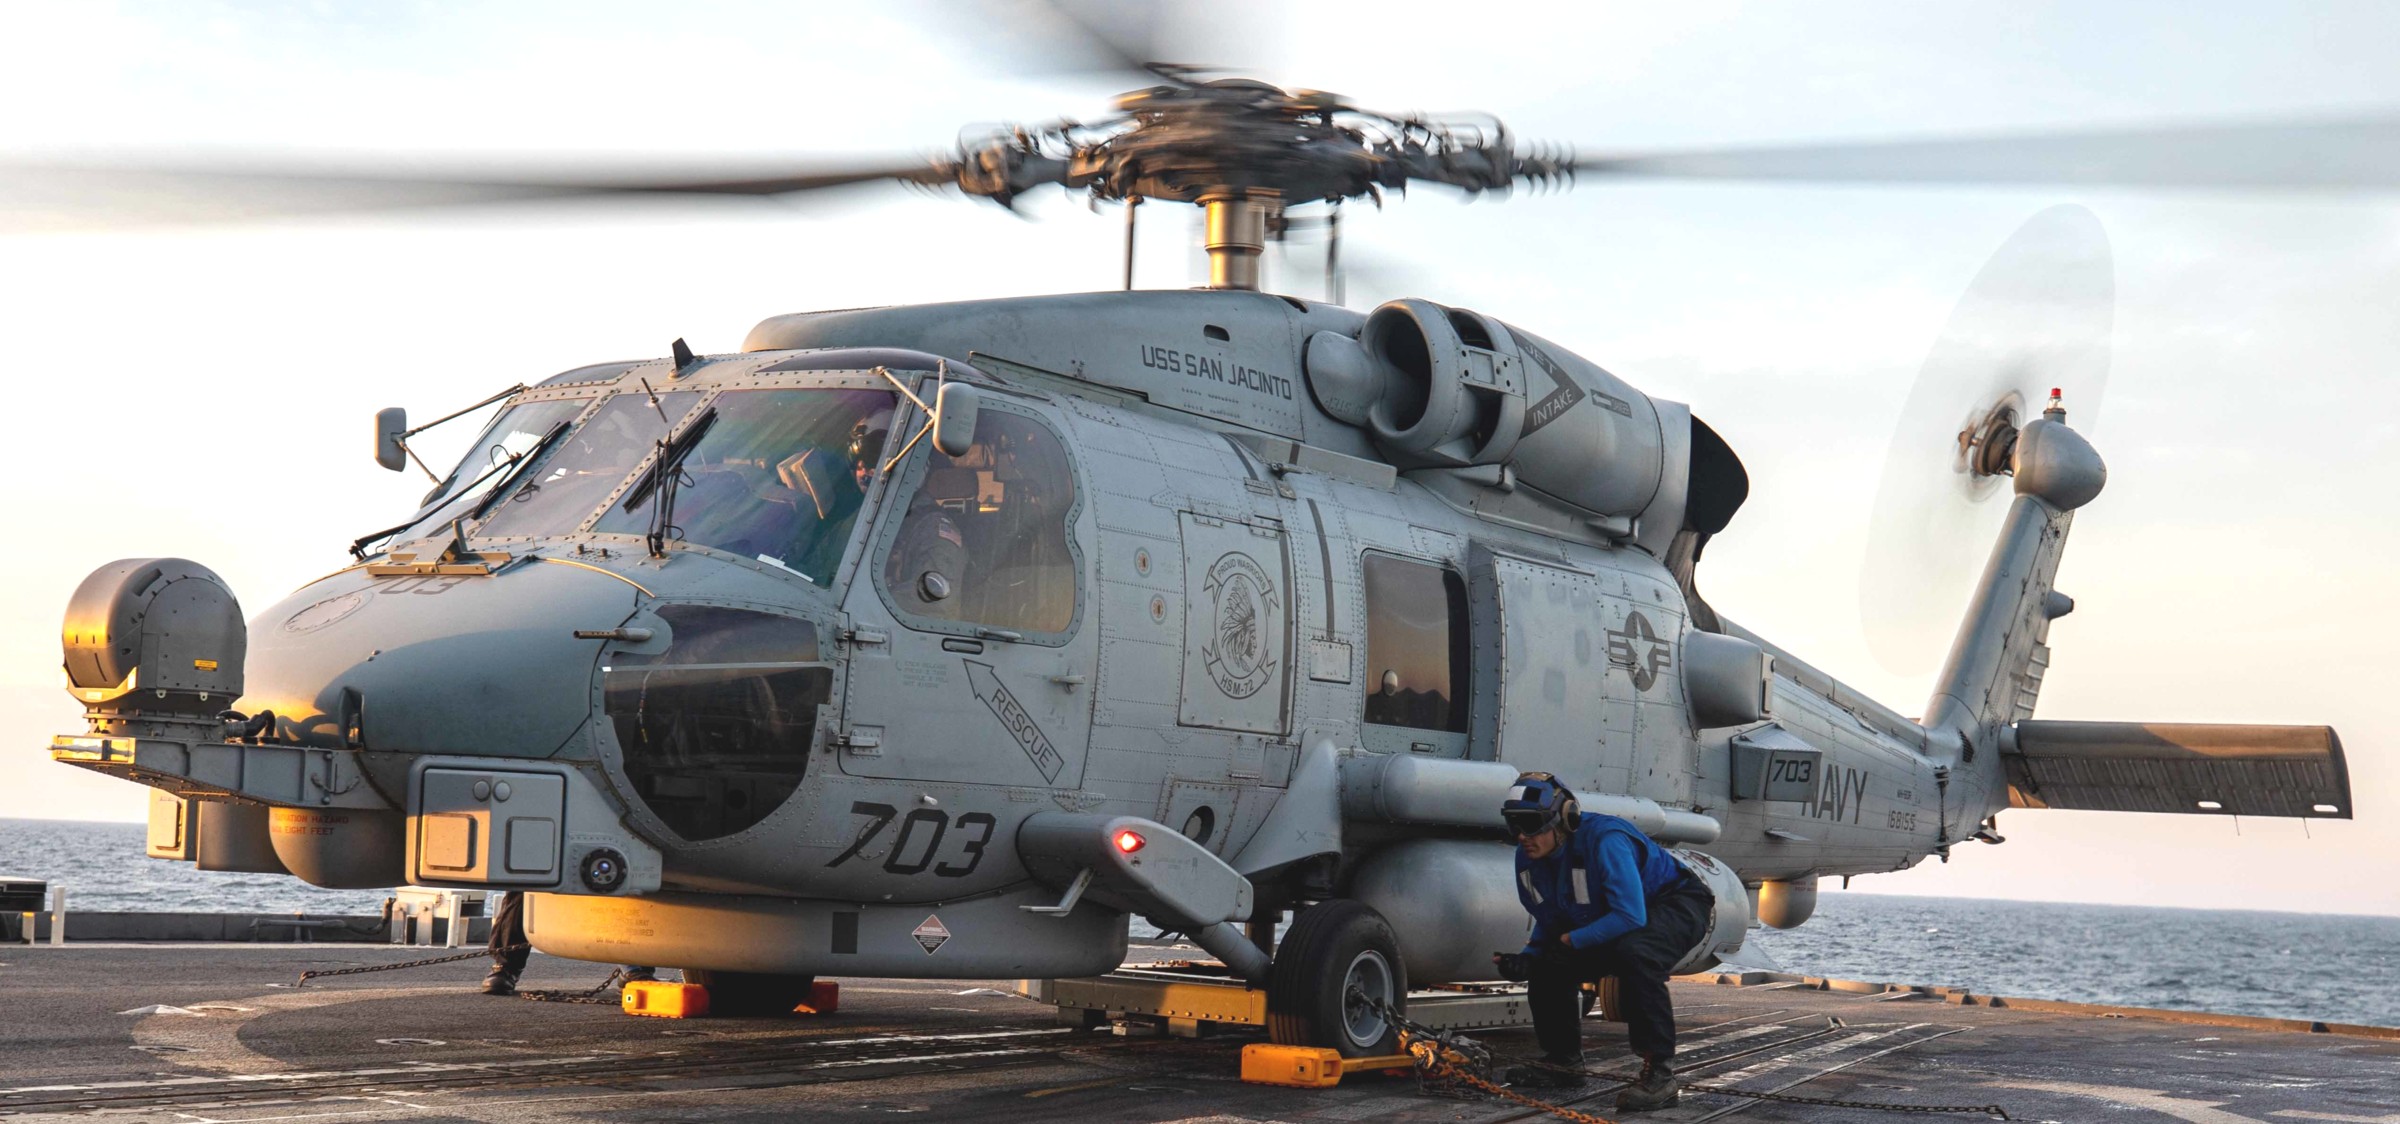 hsm-72 proud warriors helicopter maritime strike squadron mh-60r seahawk carrier air wing cvw-1 cg-56 uss san jacinto 55